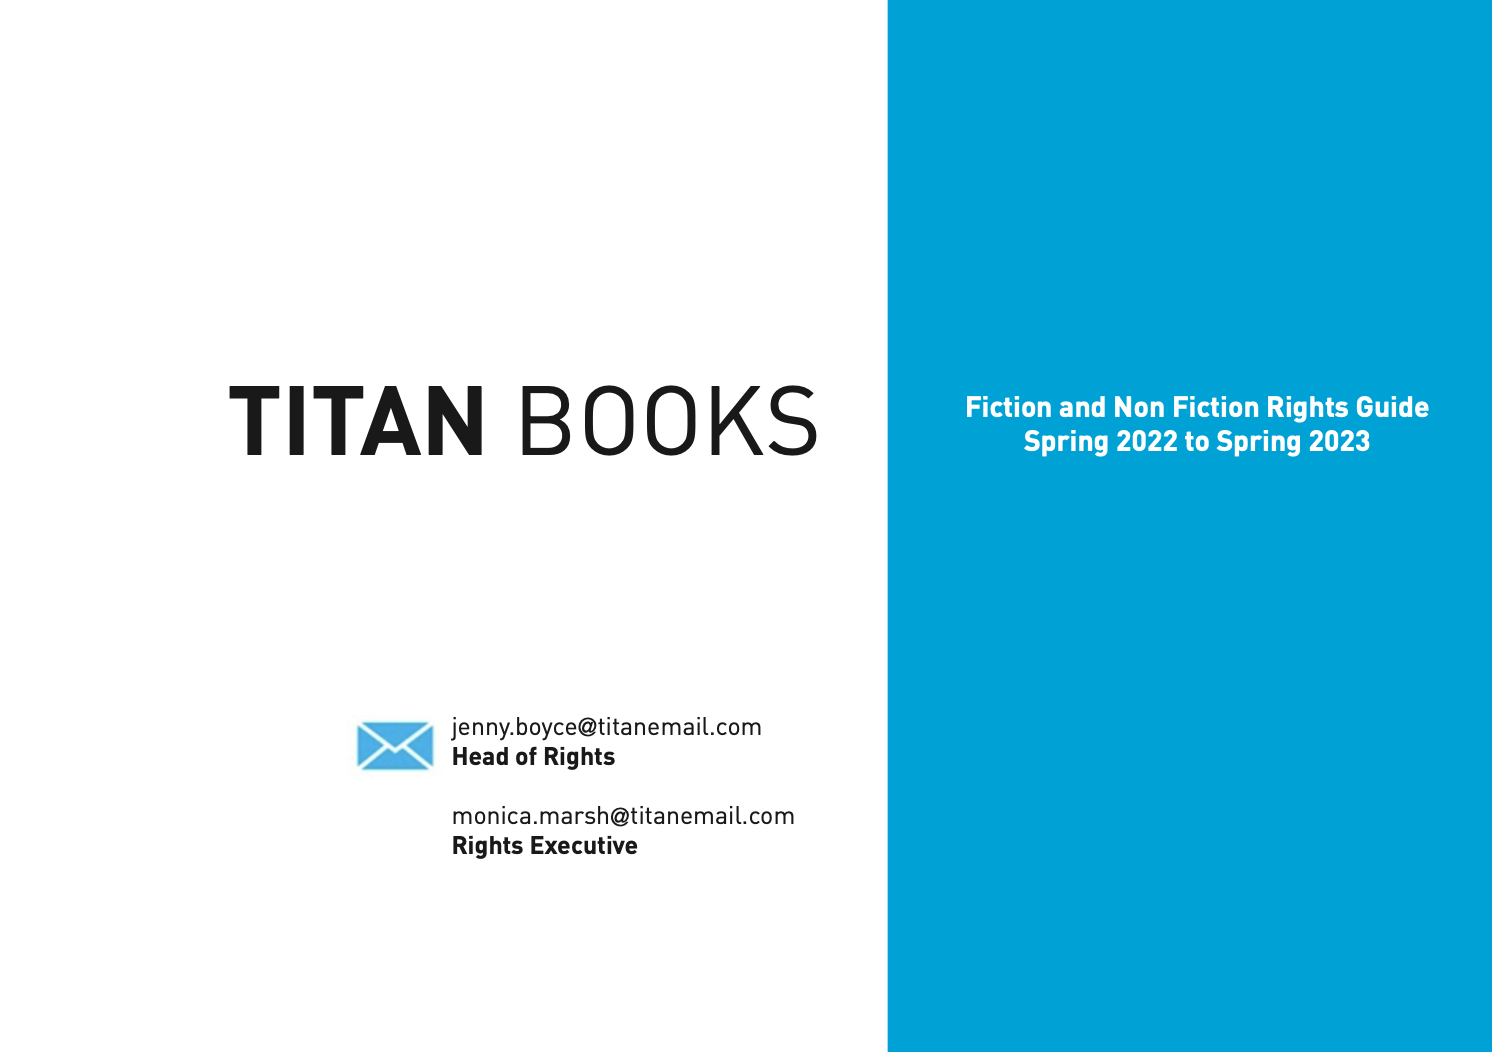 [Preview Image for Titan Books New Titles 2022 - Fiction and Non Fiction]